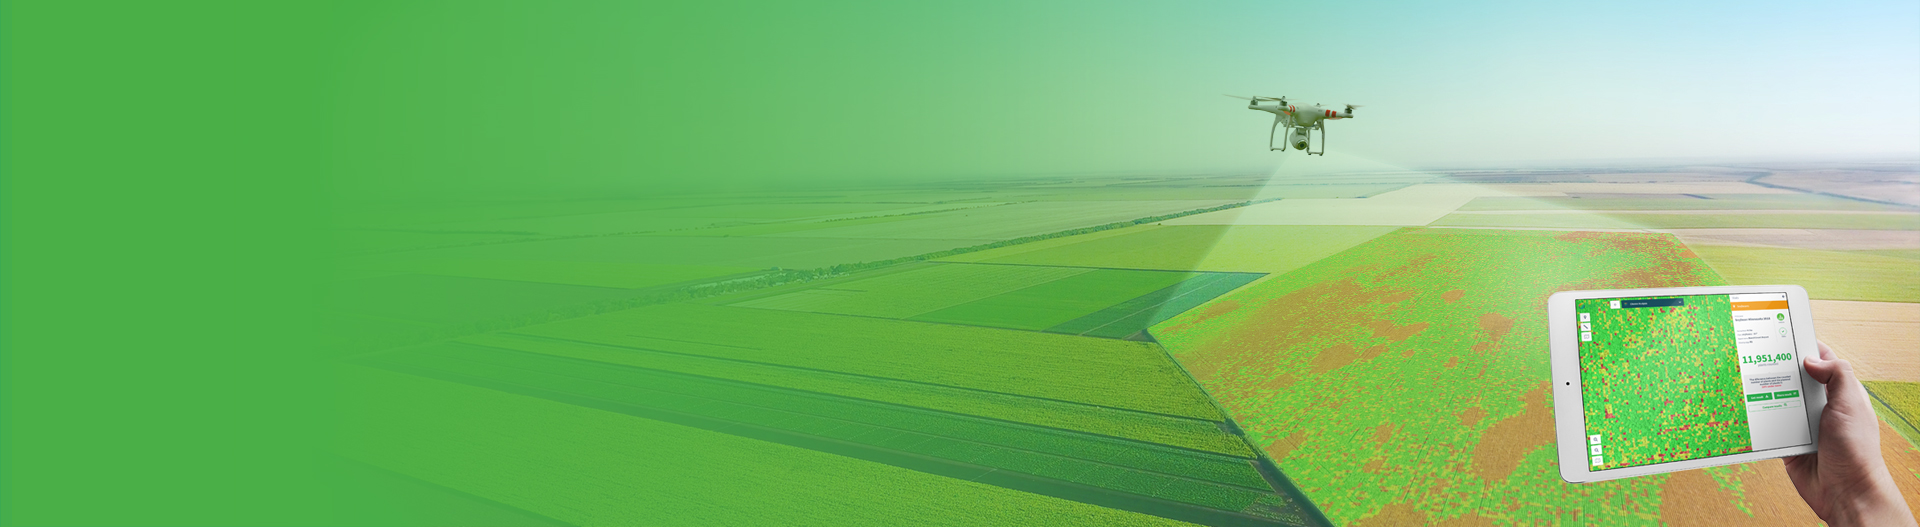 Agremo Software Services - The most powerful field analytics software for precision agriculture